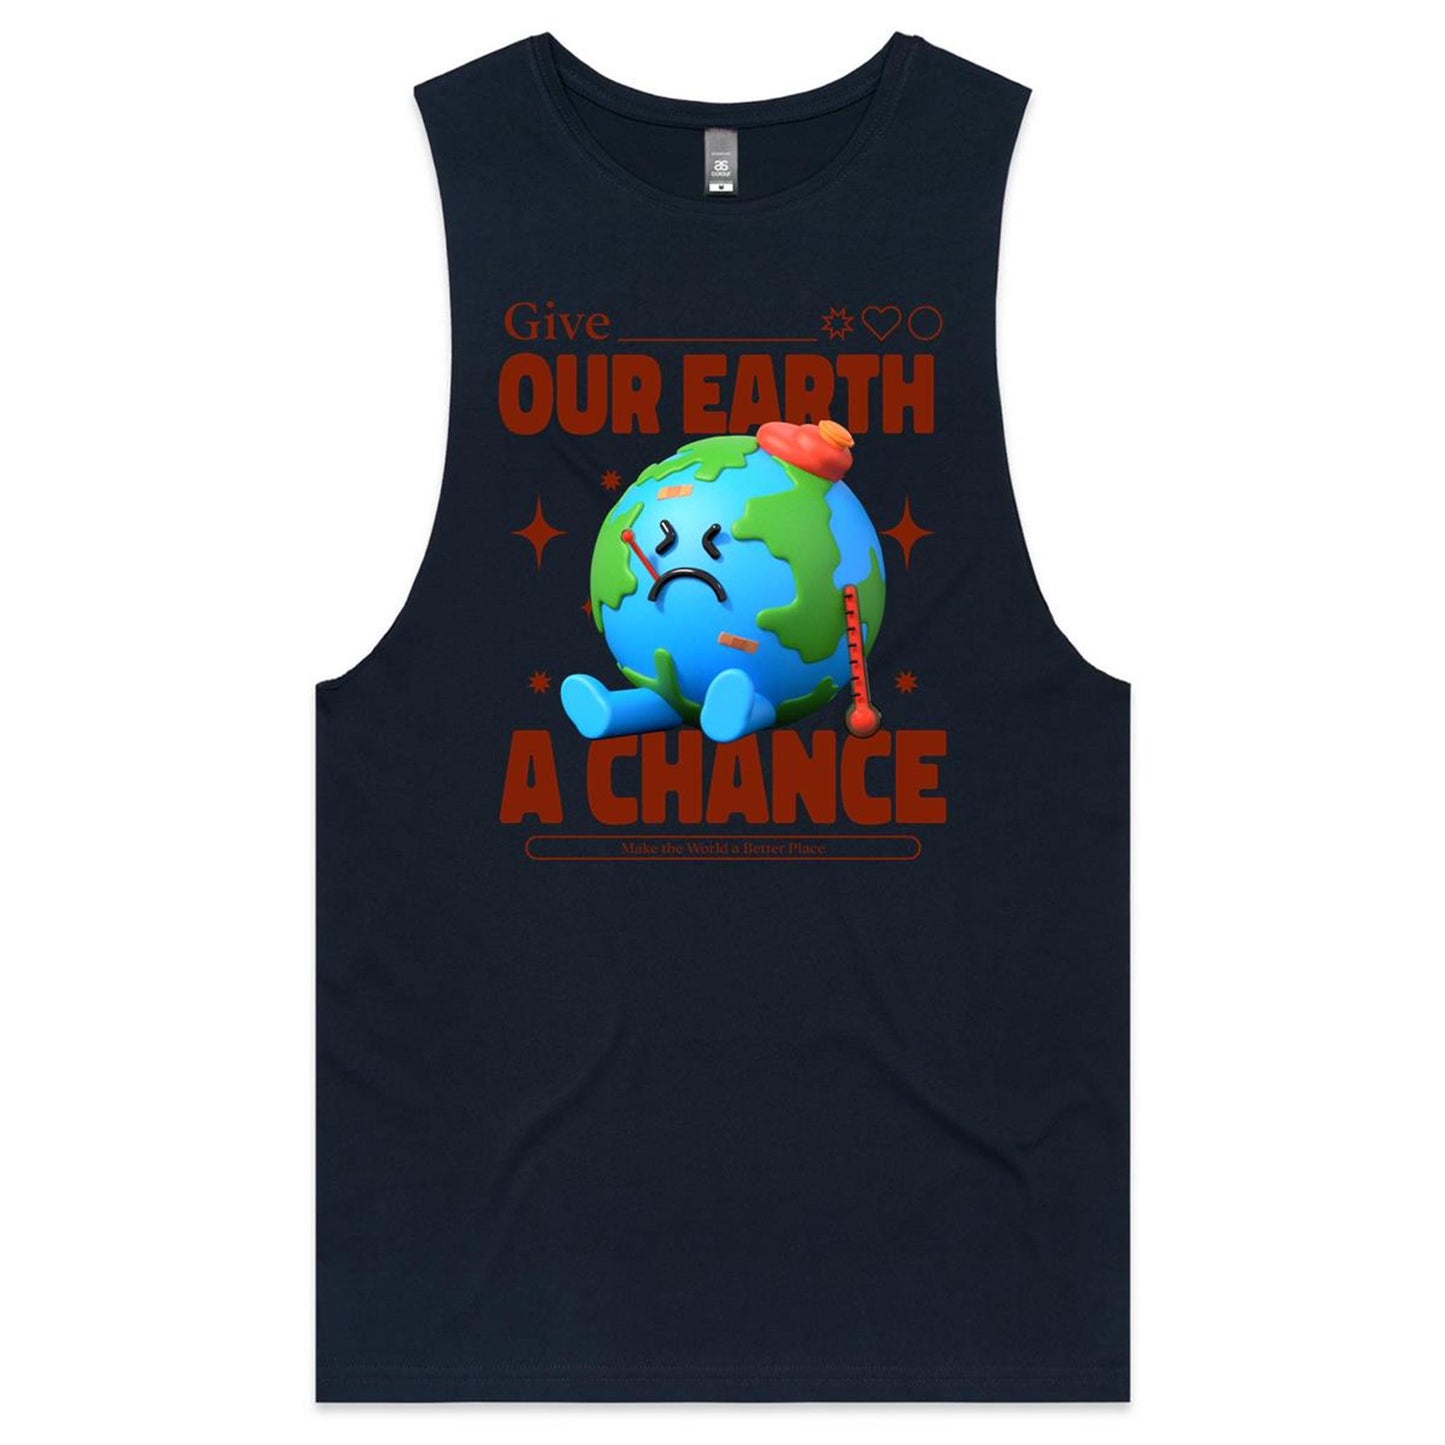 Give Our Earth A Chance - Mens Tank Top Tee Navy Mens Tank Tee Environment